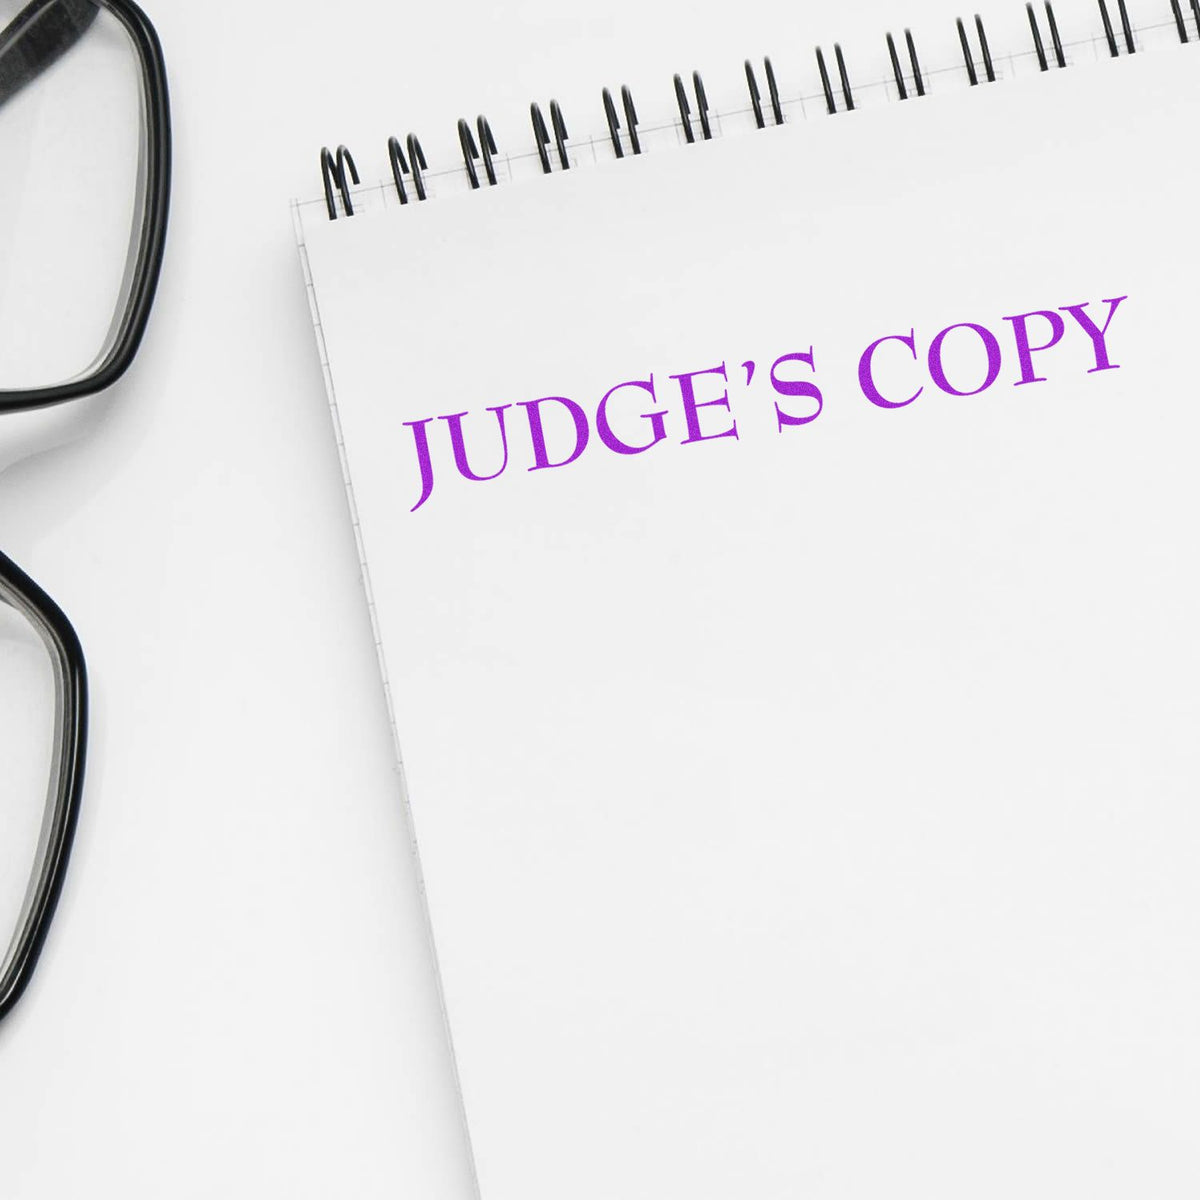 Judges Copy Legal Rubber Stamp In Use